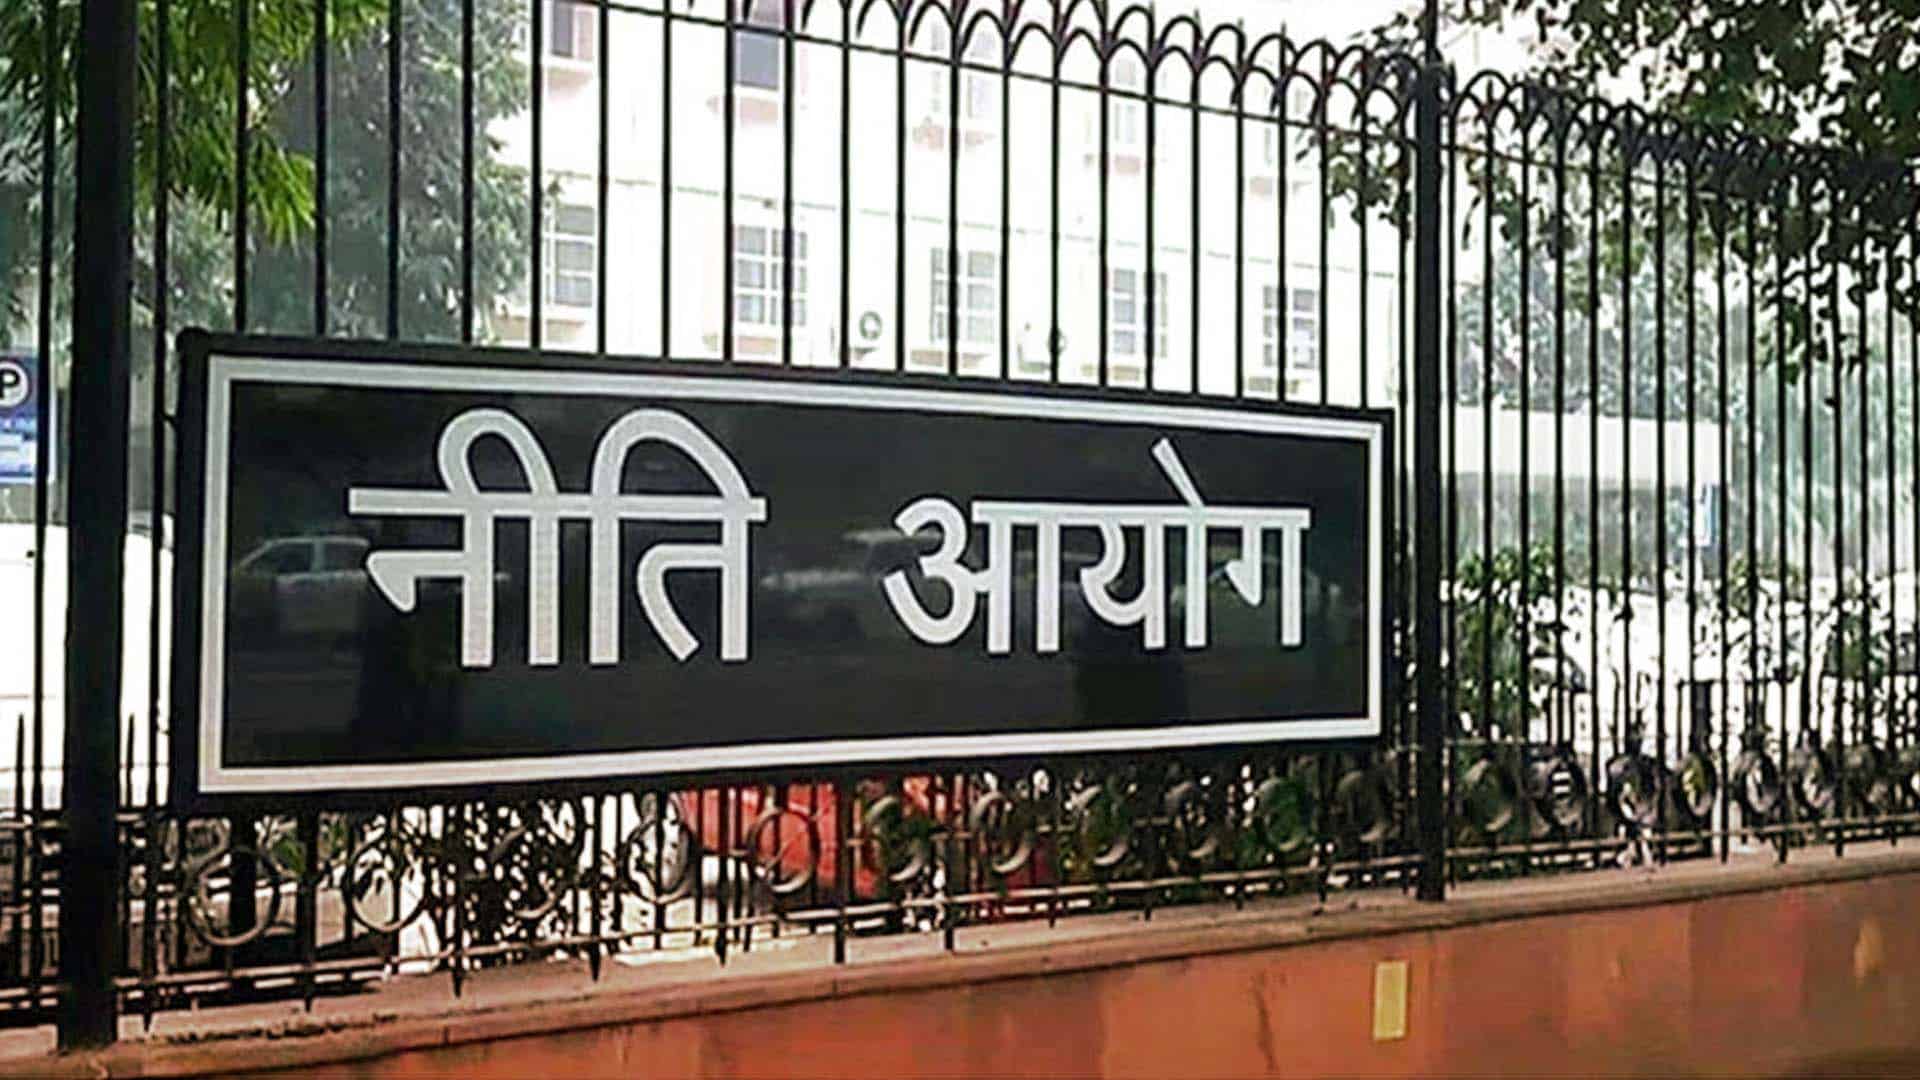 NITI Aayog’s State Energy and Climate Index: Gujarat tops